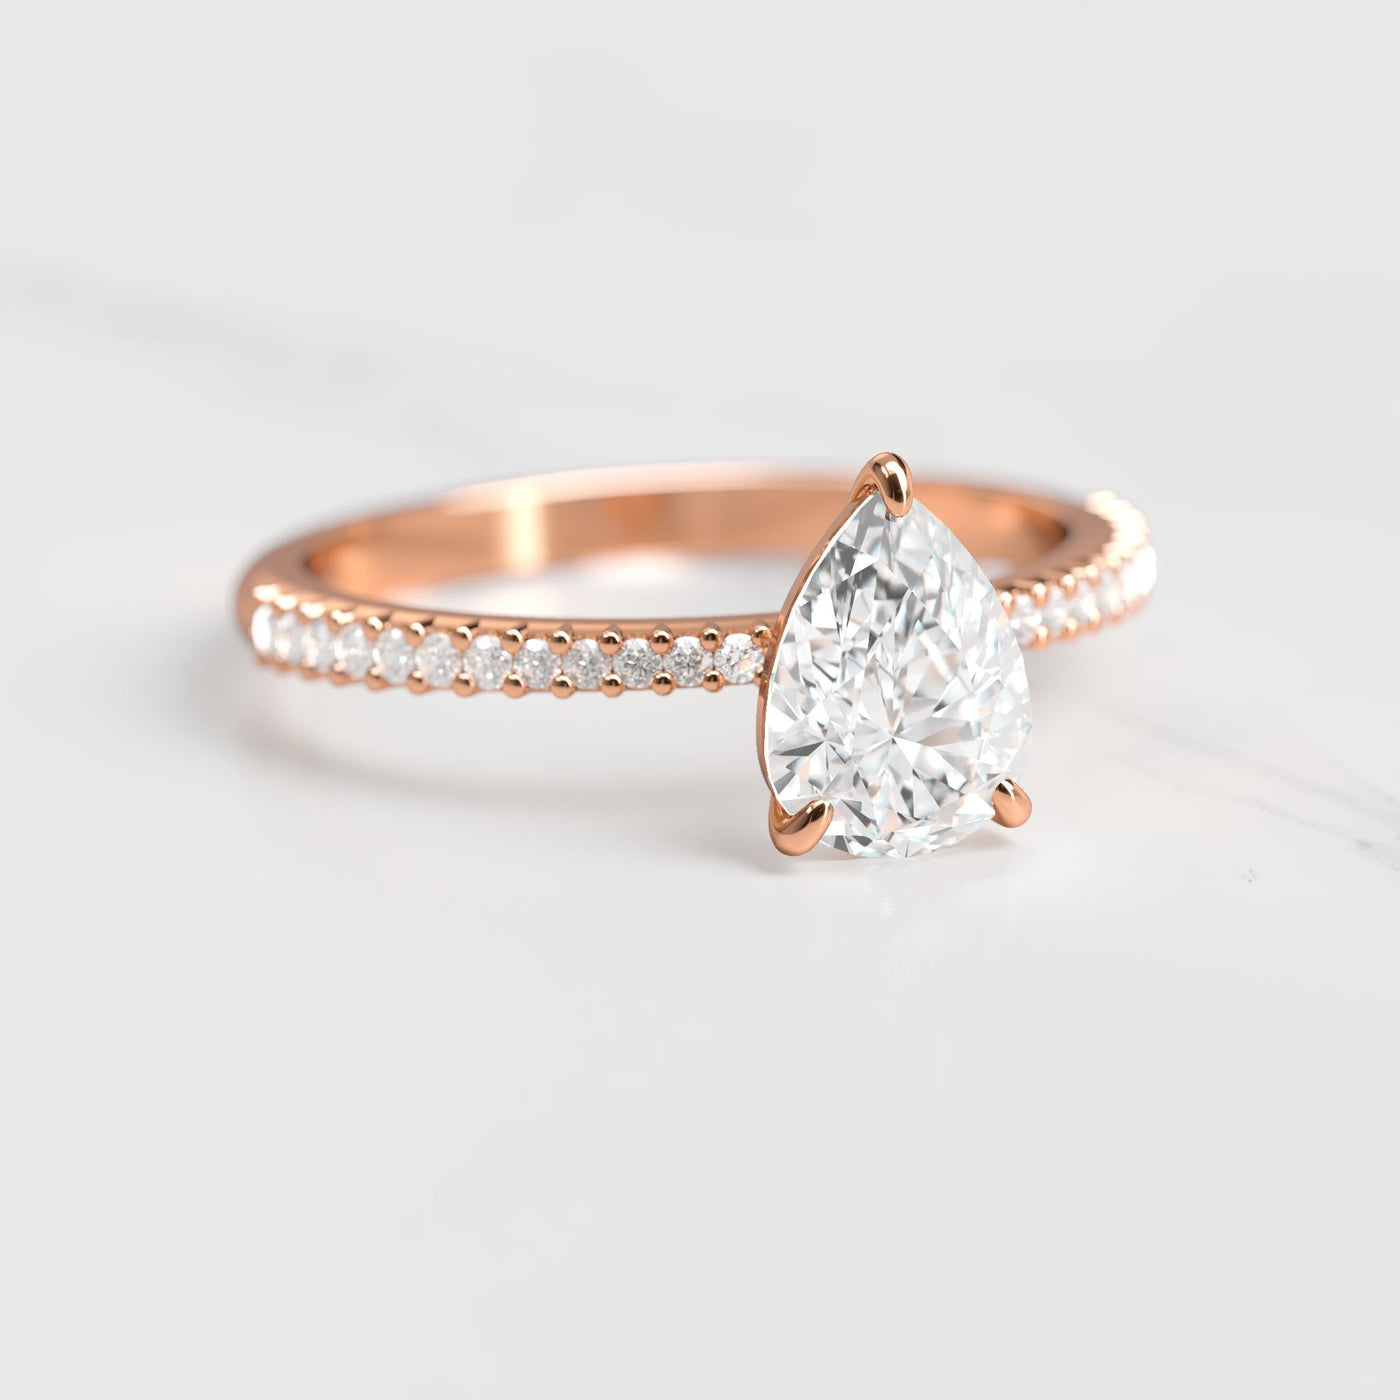 Pear-shaped half pave tapered diamond ring